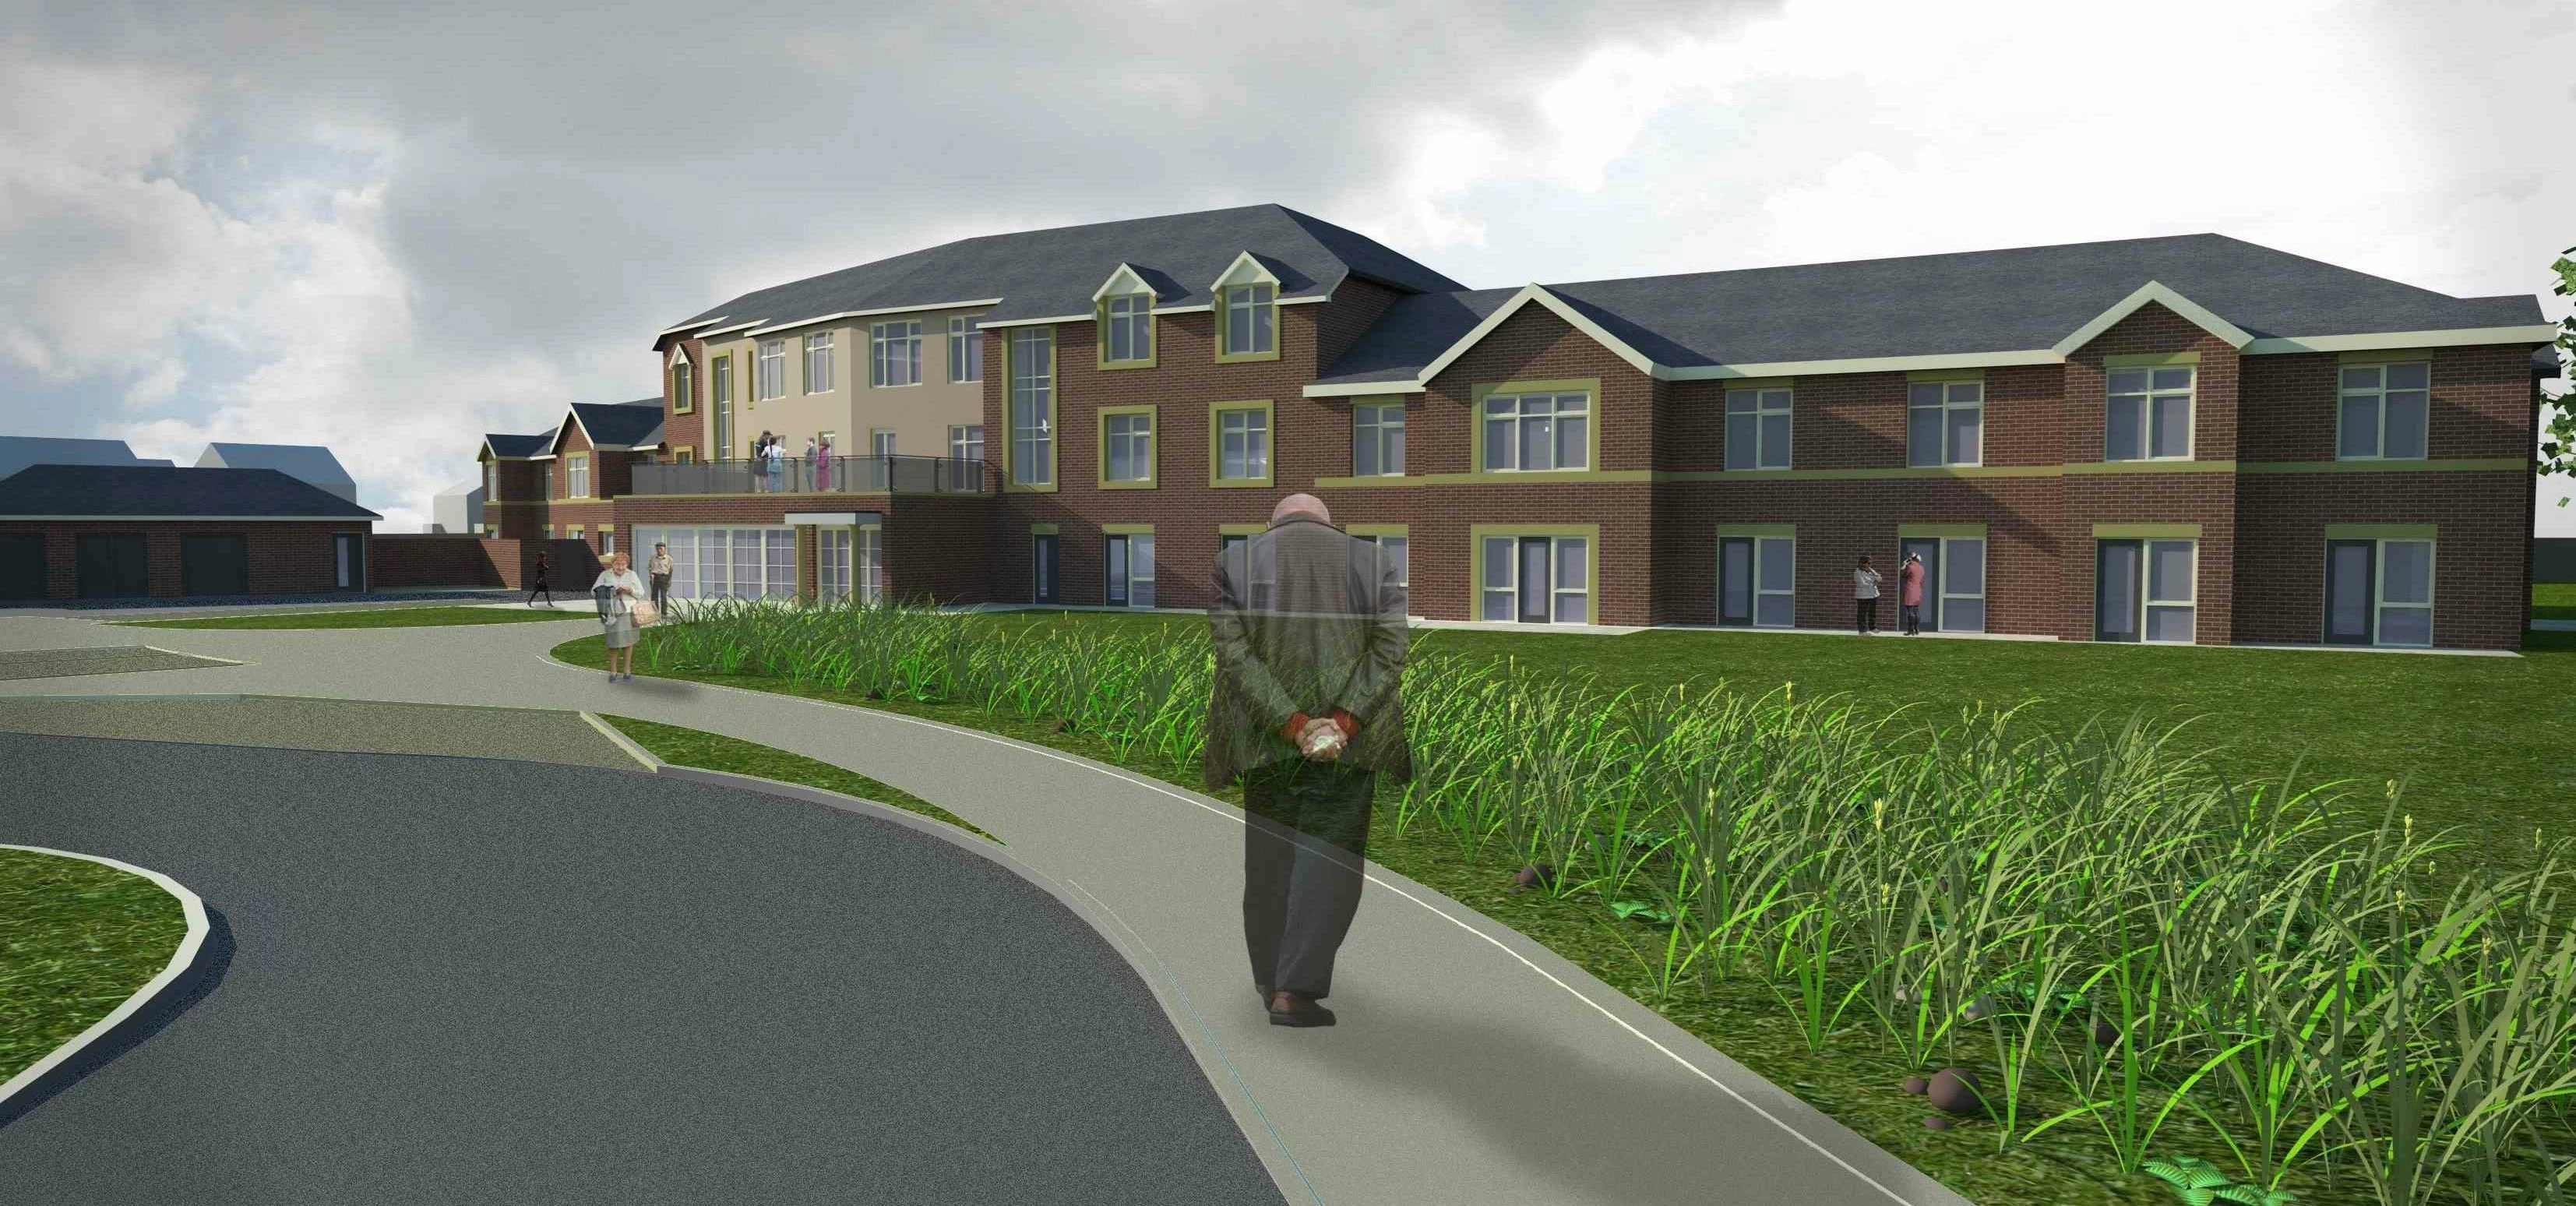 Artist's impression of the new residential care homes by Eothen Homes